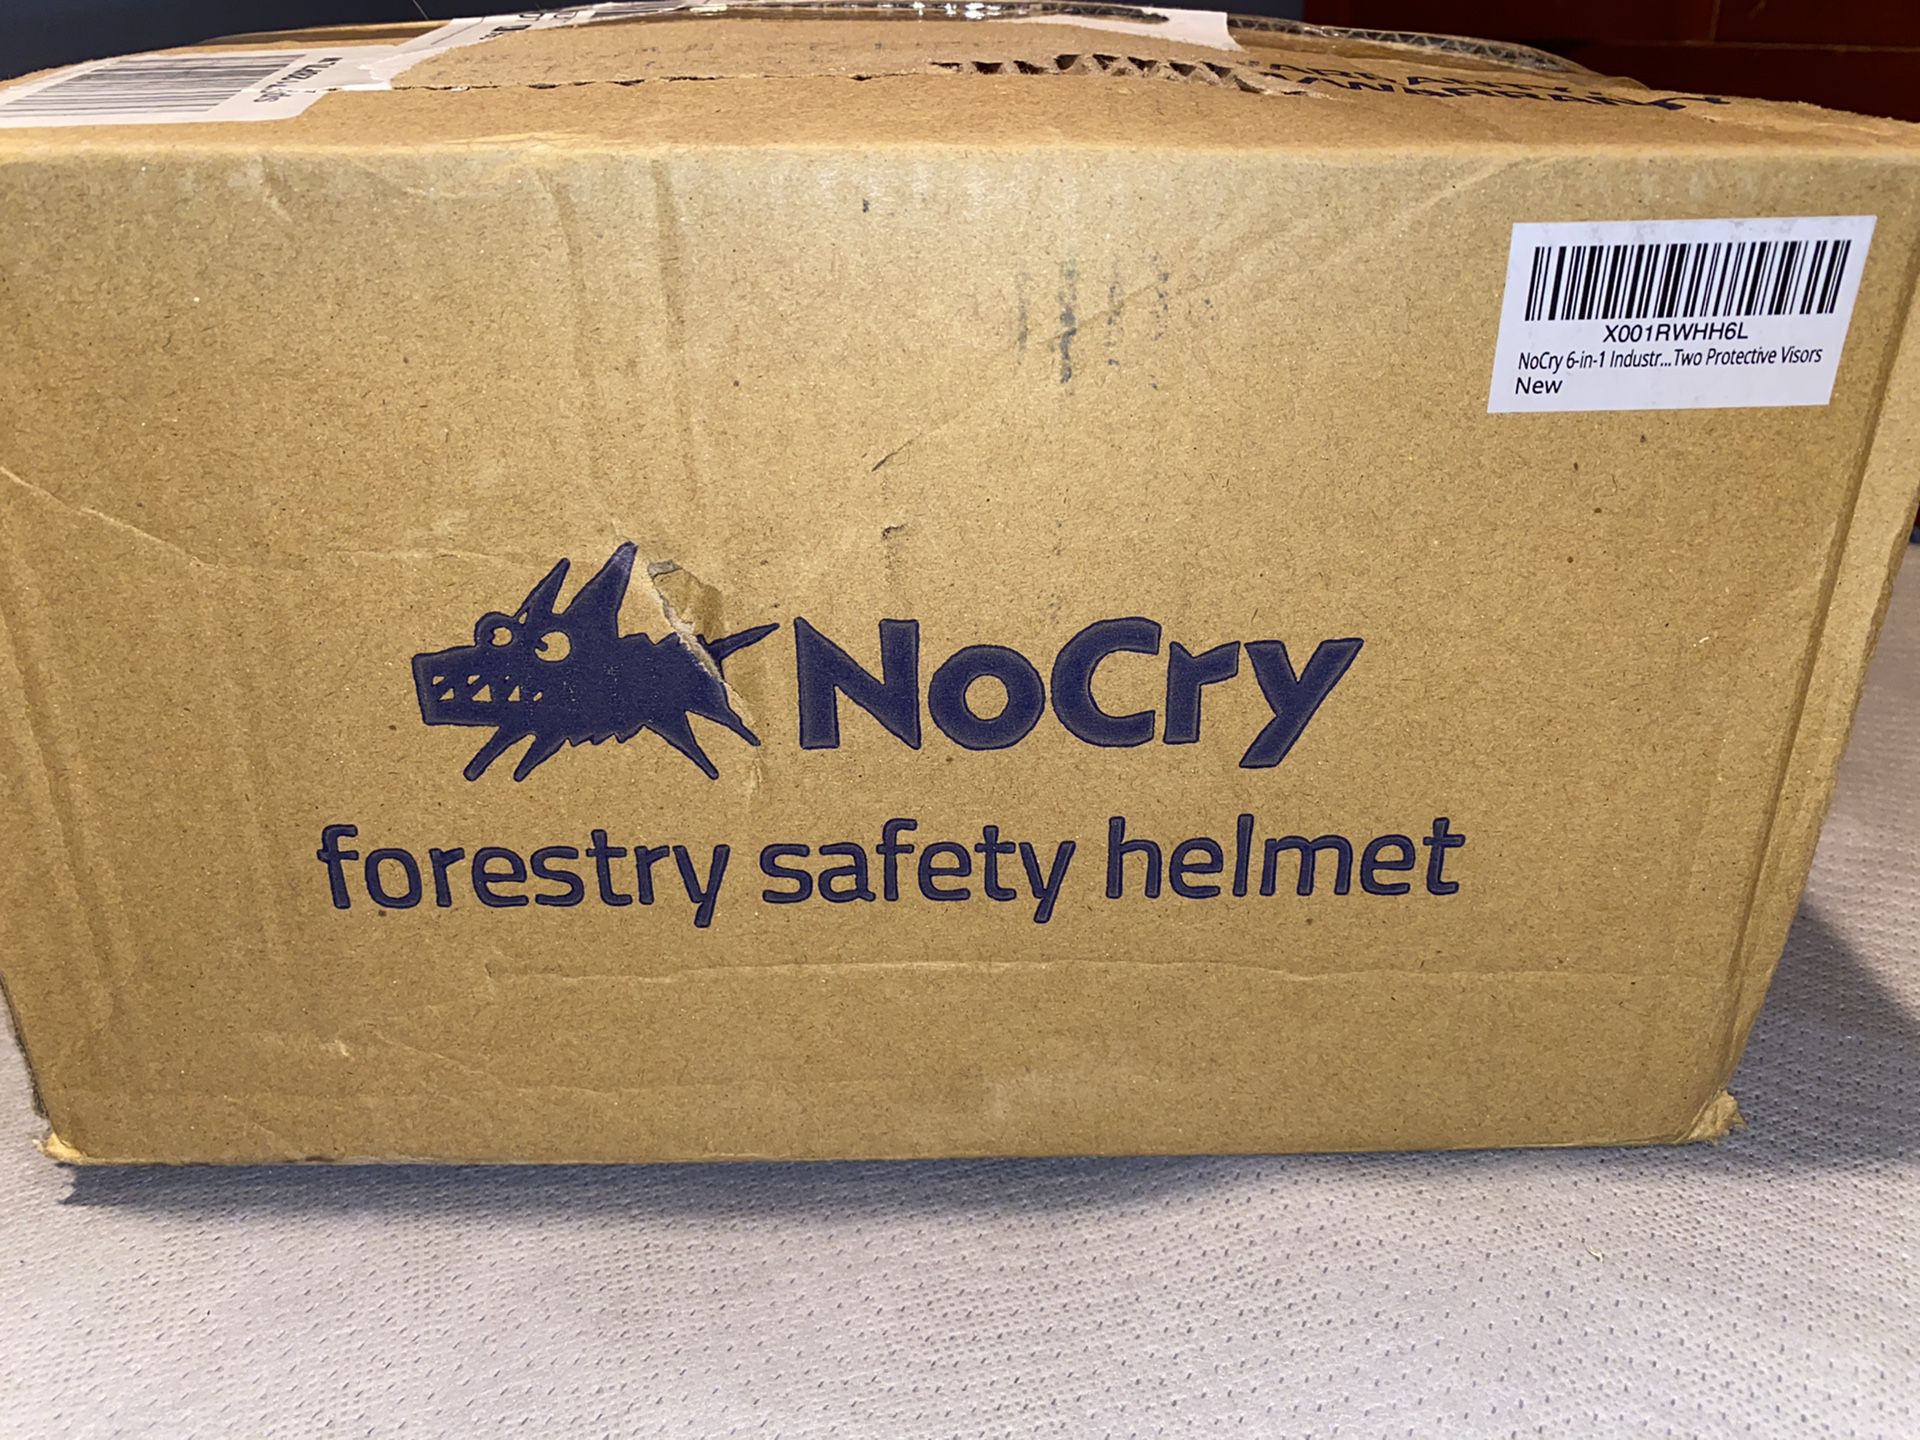 NoCry 6-in-1 Industrial Forestry Safety Helmet for Sale in Morton Grove, IL  OfferUp